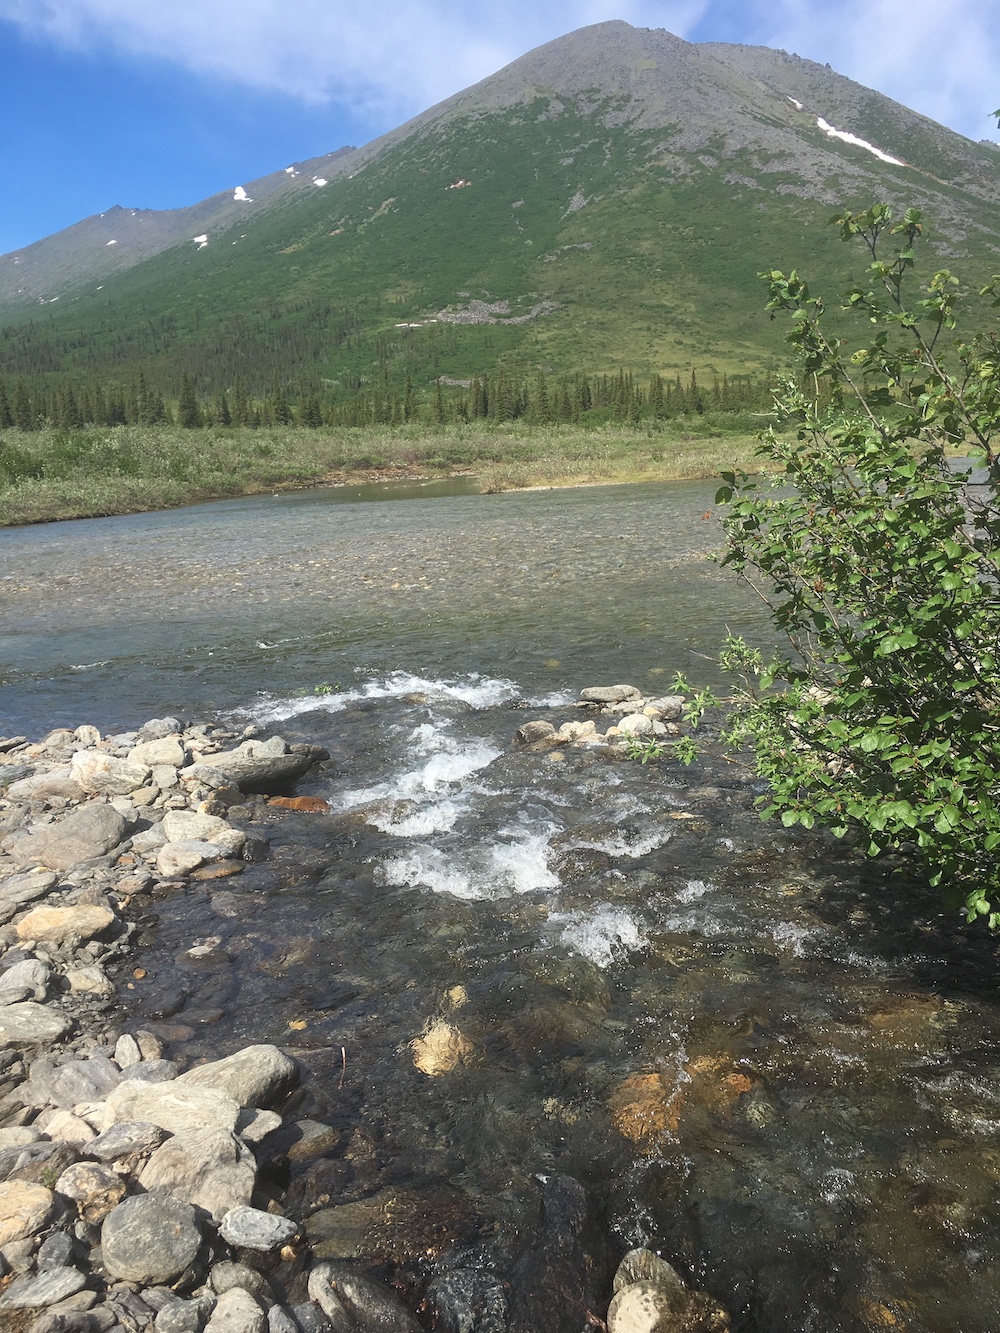 A clear stream flows into a clear river with mountains in the background.